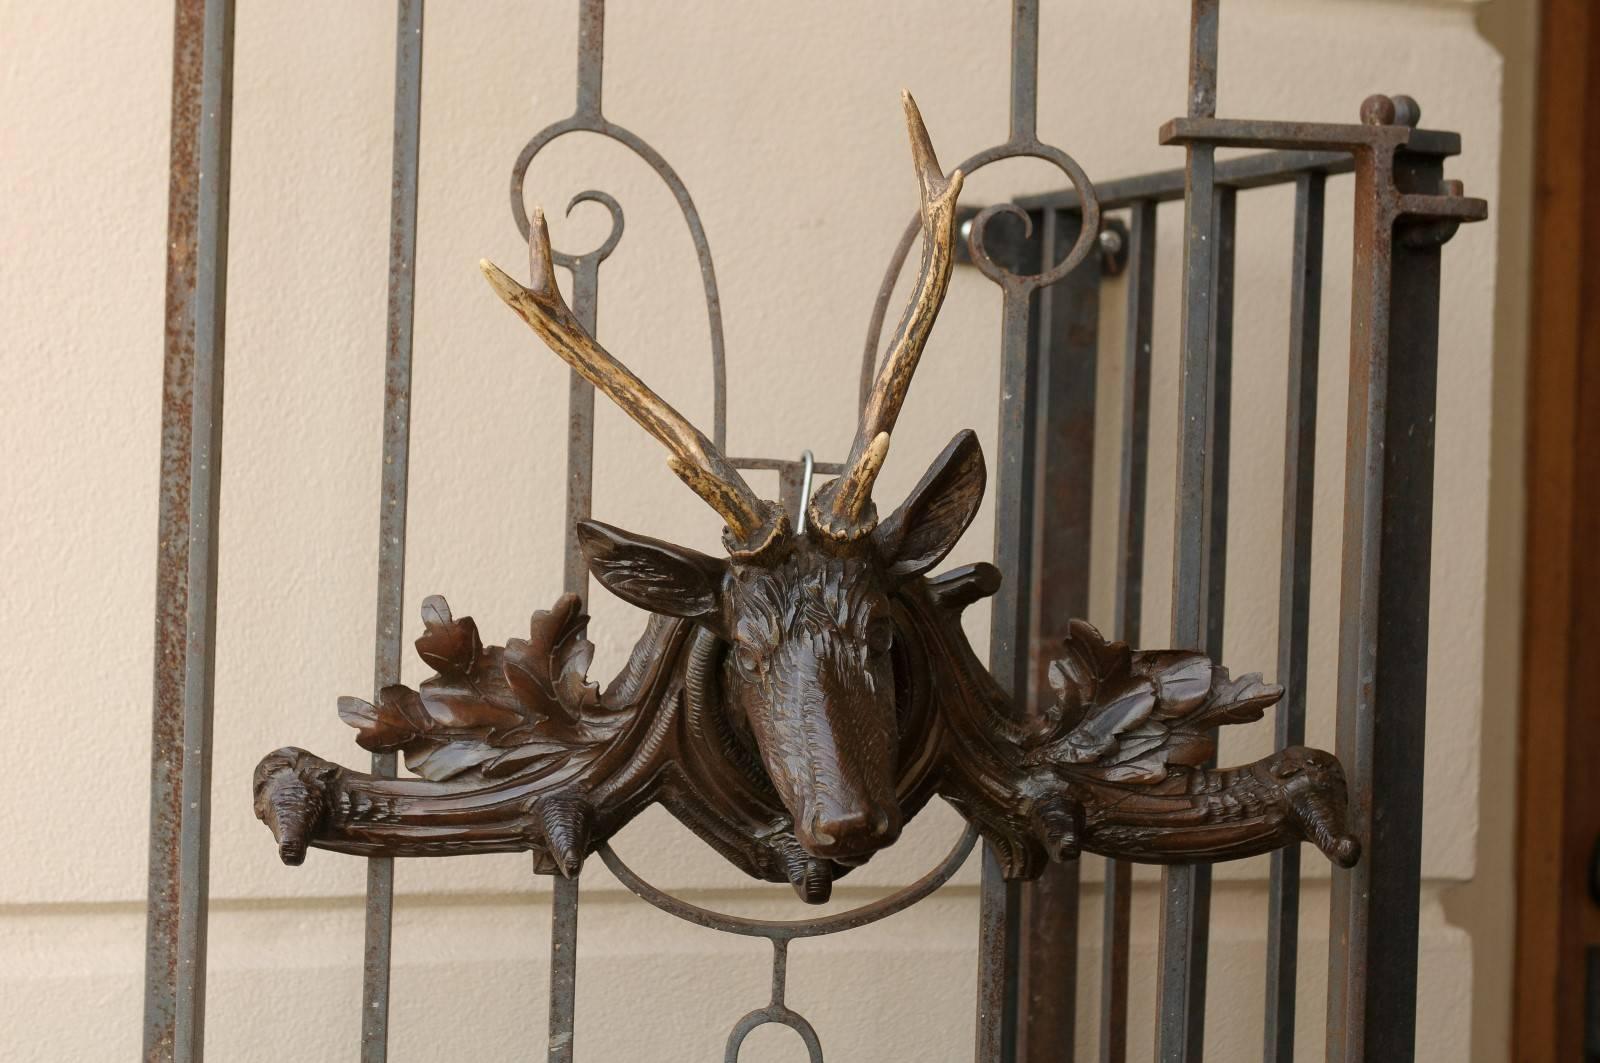 French turn of the century wall-mounted coat rack (also known as a hat rack) with carved deer and real antlers. This carved wood French hat rack circa 1900 features a deer head with real antlers. The arms of this dark wood coat rack are adorned with